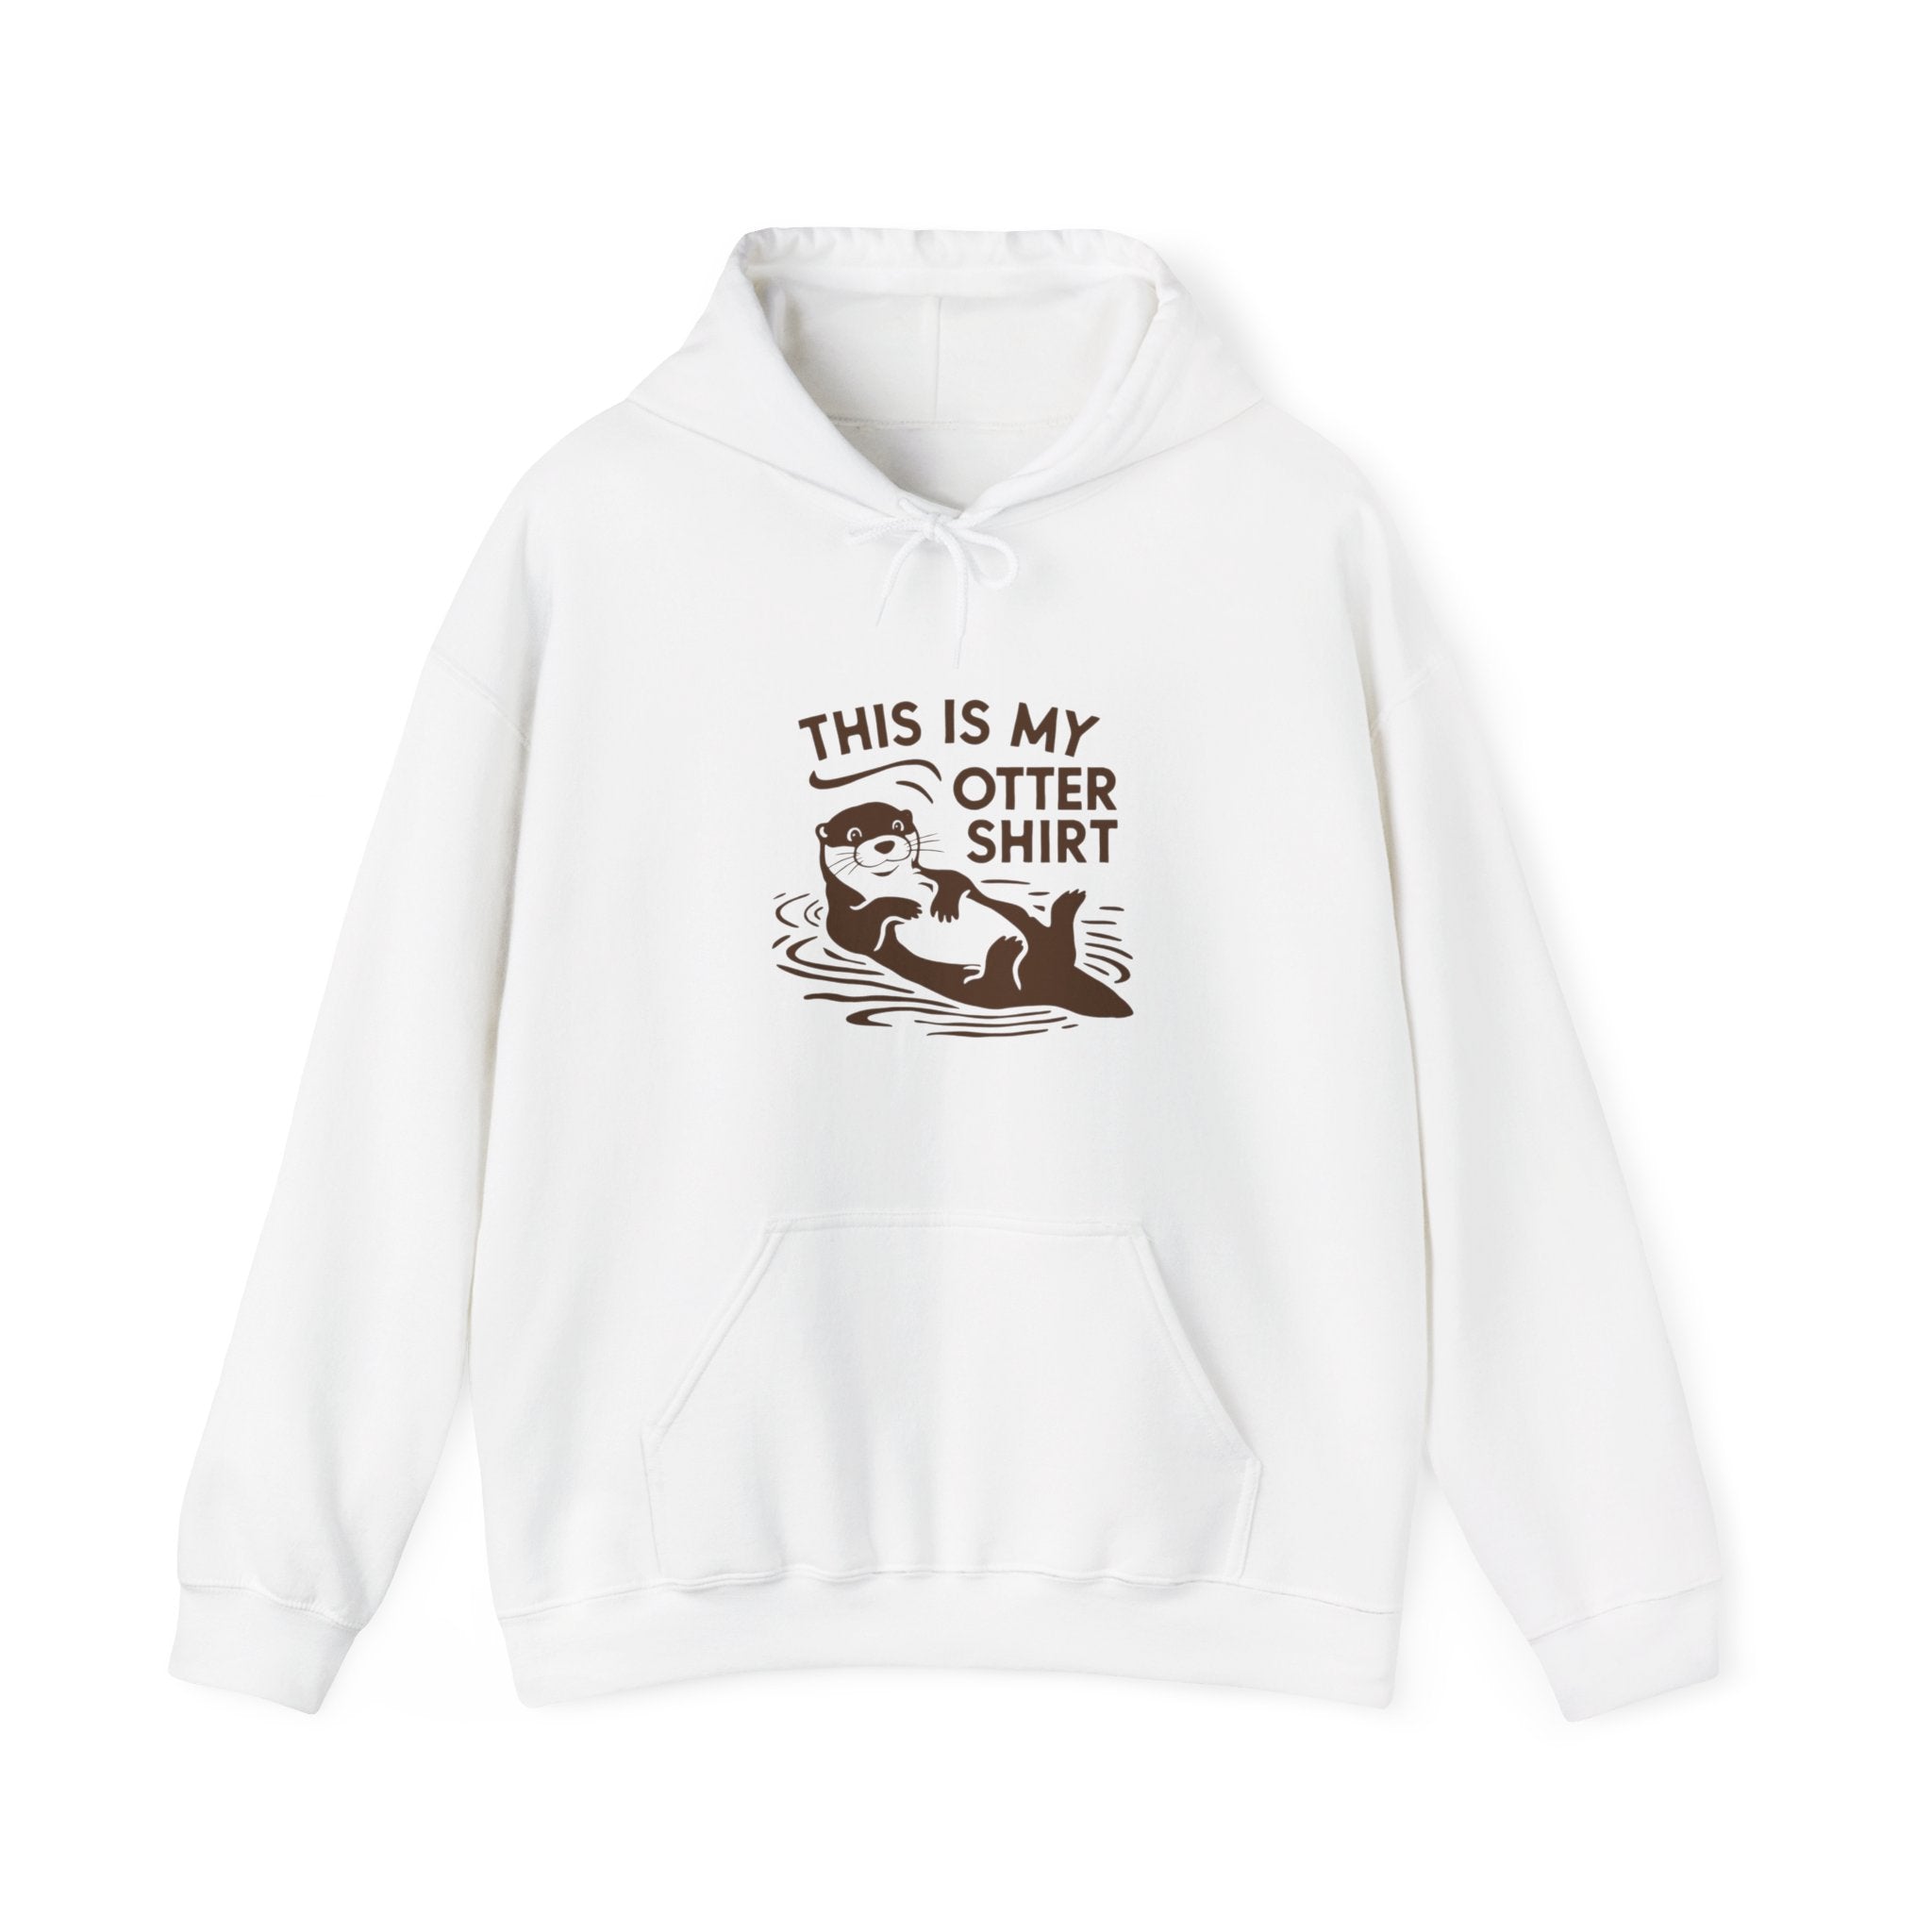 My Otter Shirt - Hooded Sweatshirt featuring an illustration of an otter floating on its back with the text "THIS IS MY OTTER SHIRT" above it.